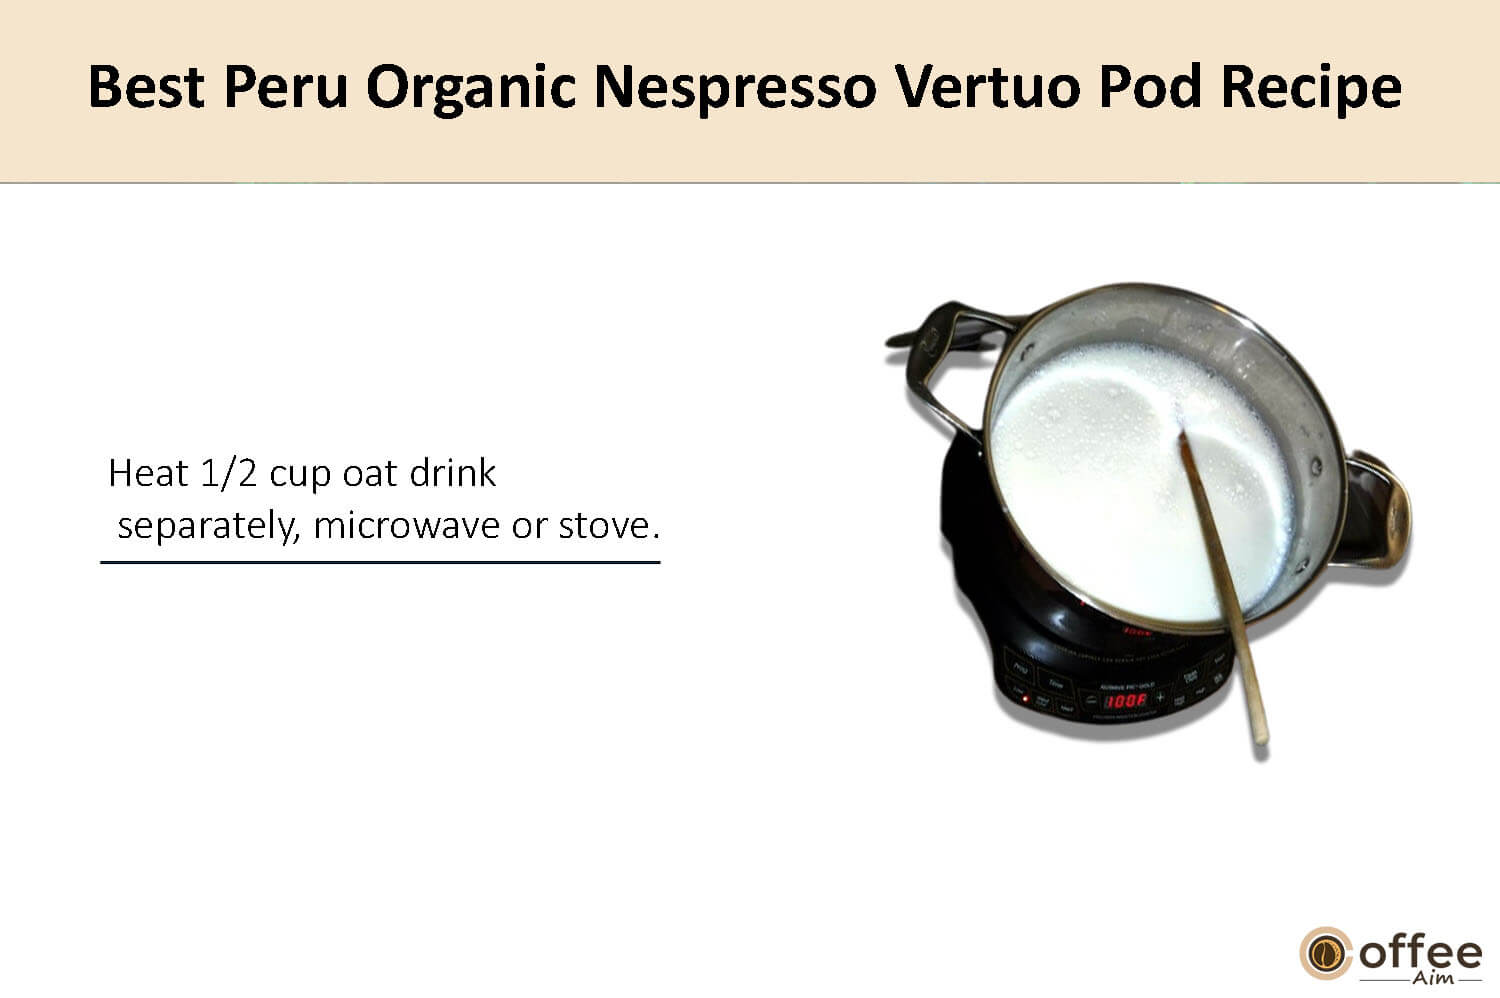 In this image, I elucidate the preparation instructions for crafting the finest Peru Organic Nespresso Vertuo coffee pod.